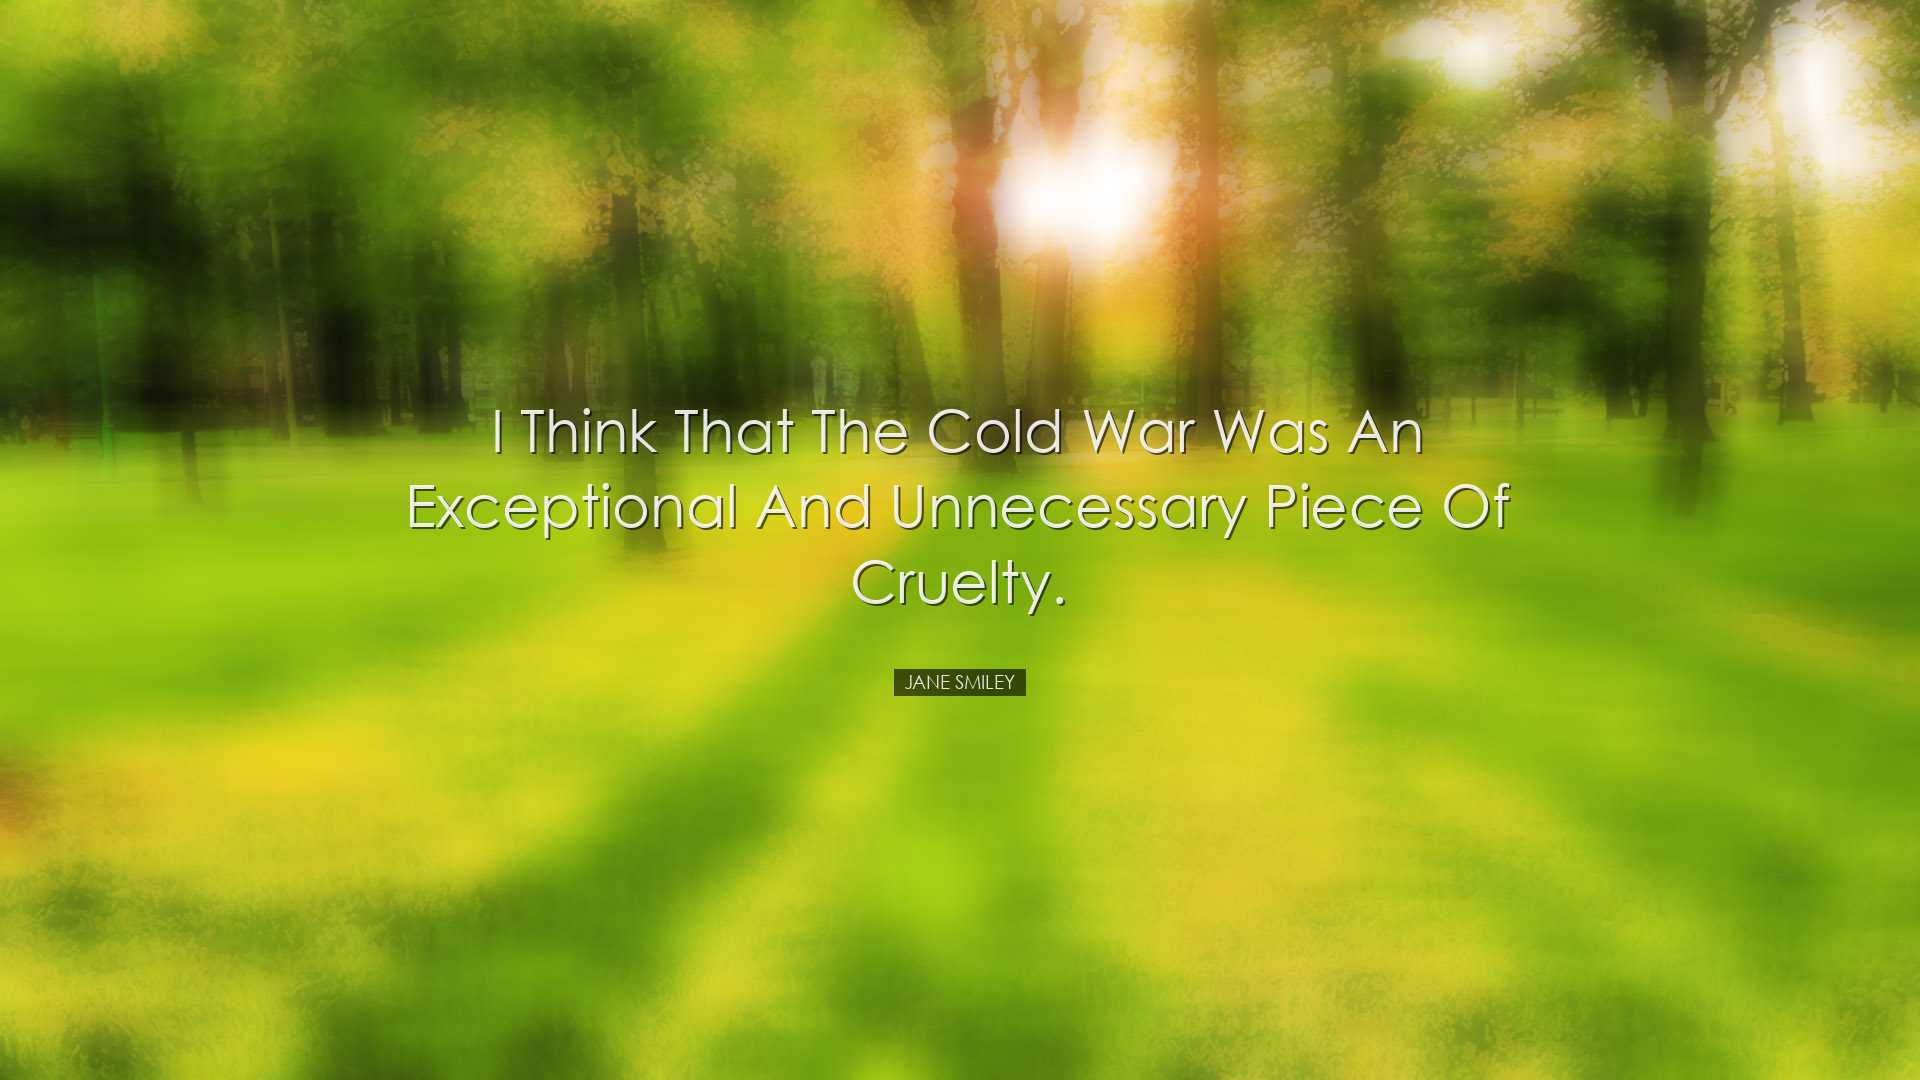 I think that the Cold War was an exceptional and unnecessary piece